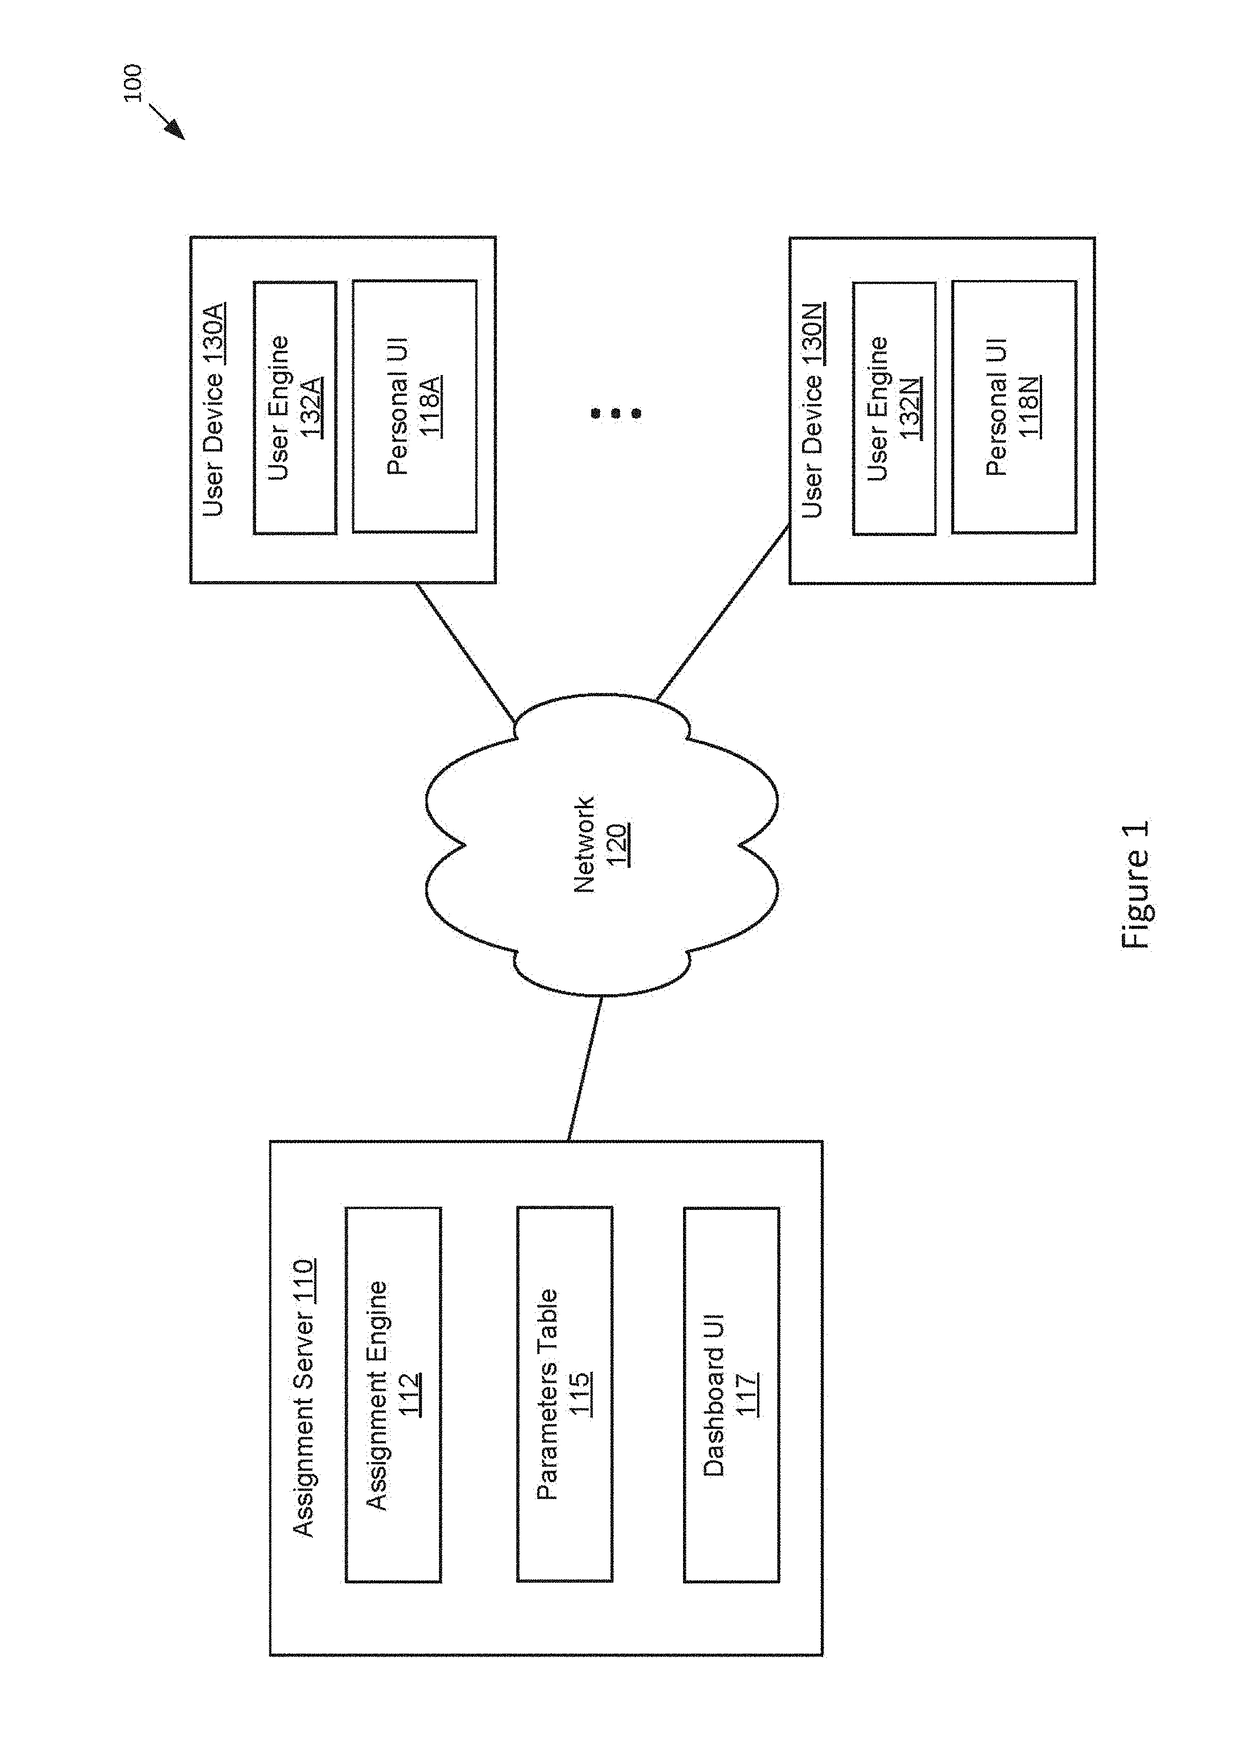 Automated distribution of subtask assignments to user devices